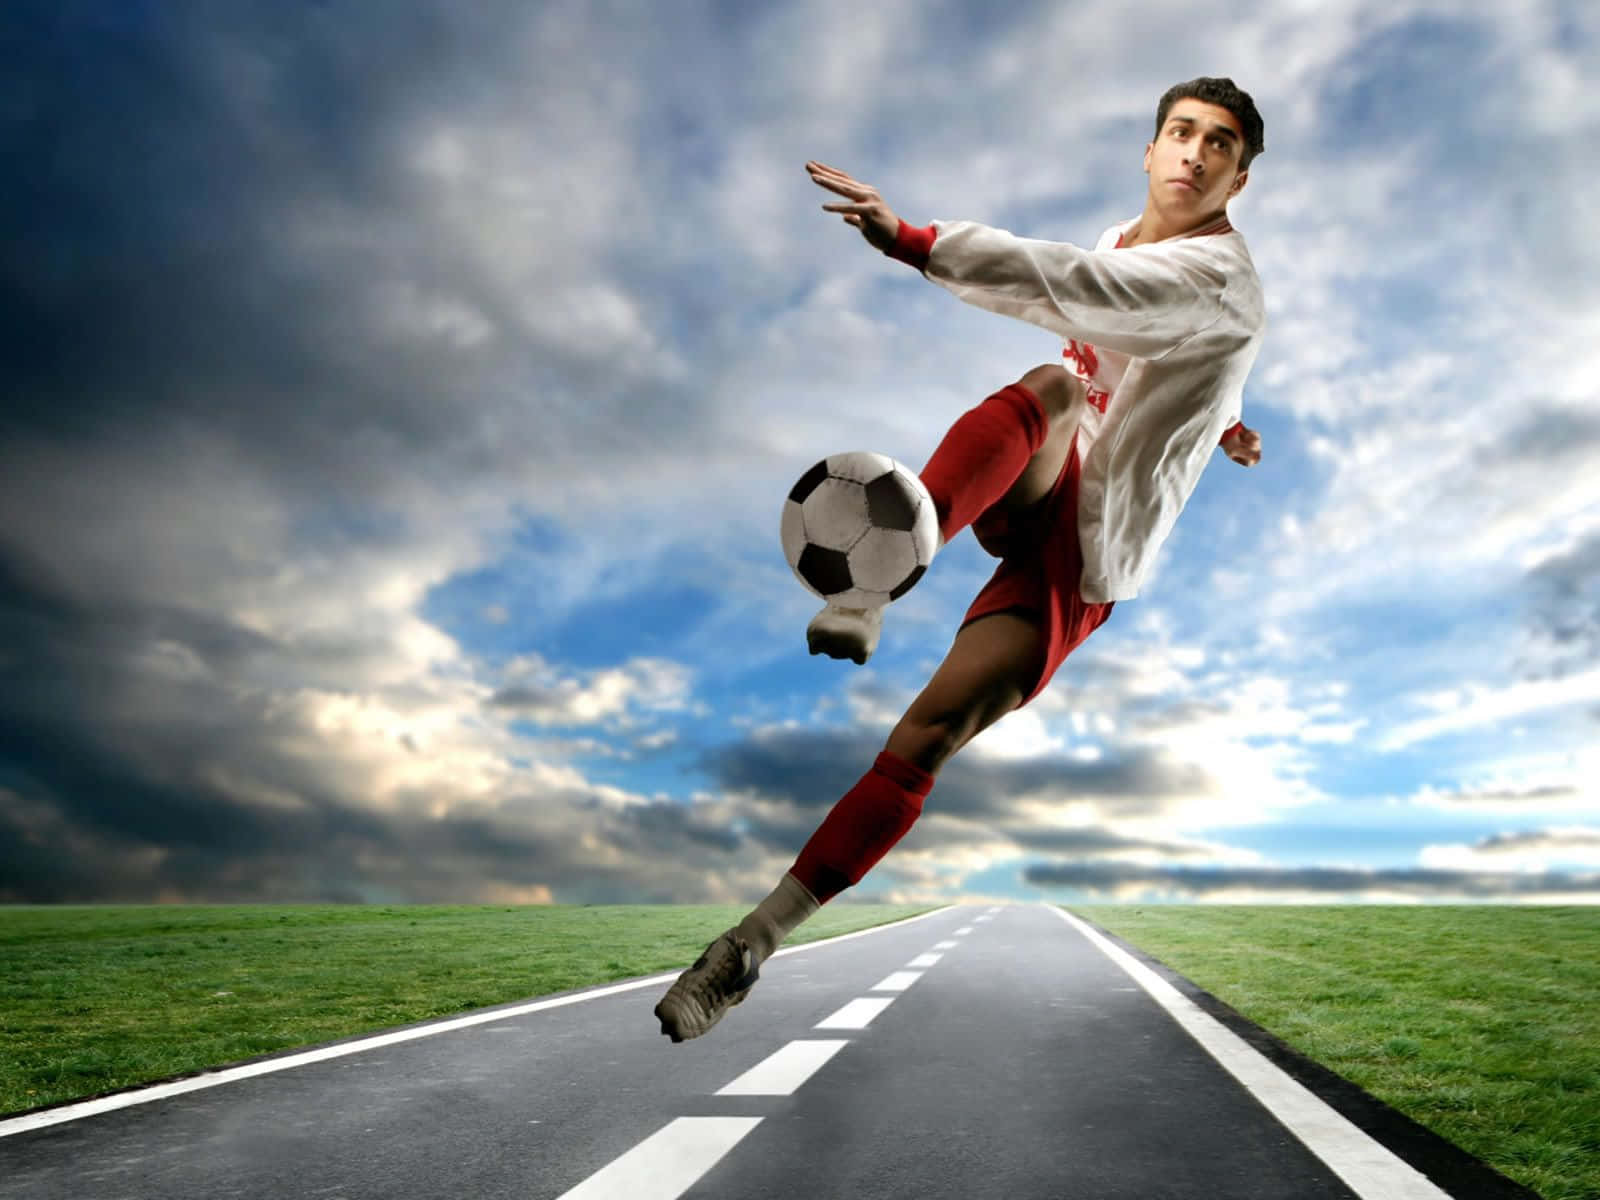 3D Sports Action: A soccer player's perfect kick Wallpaper